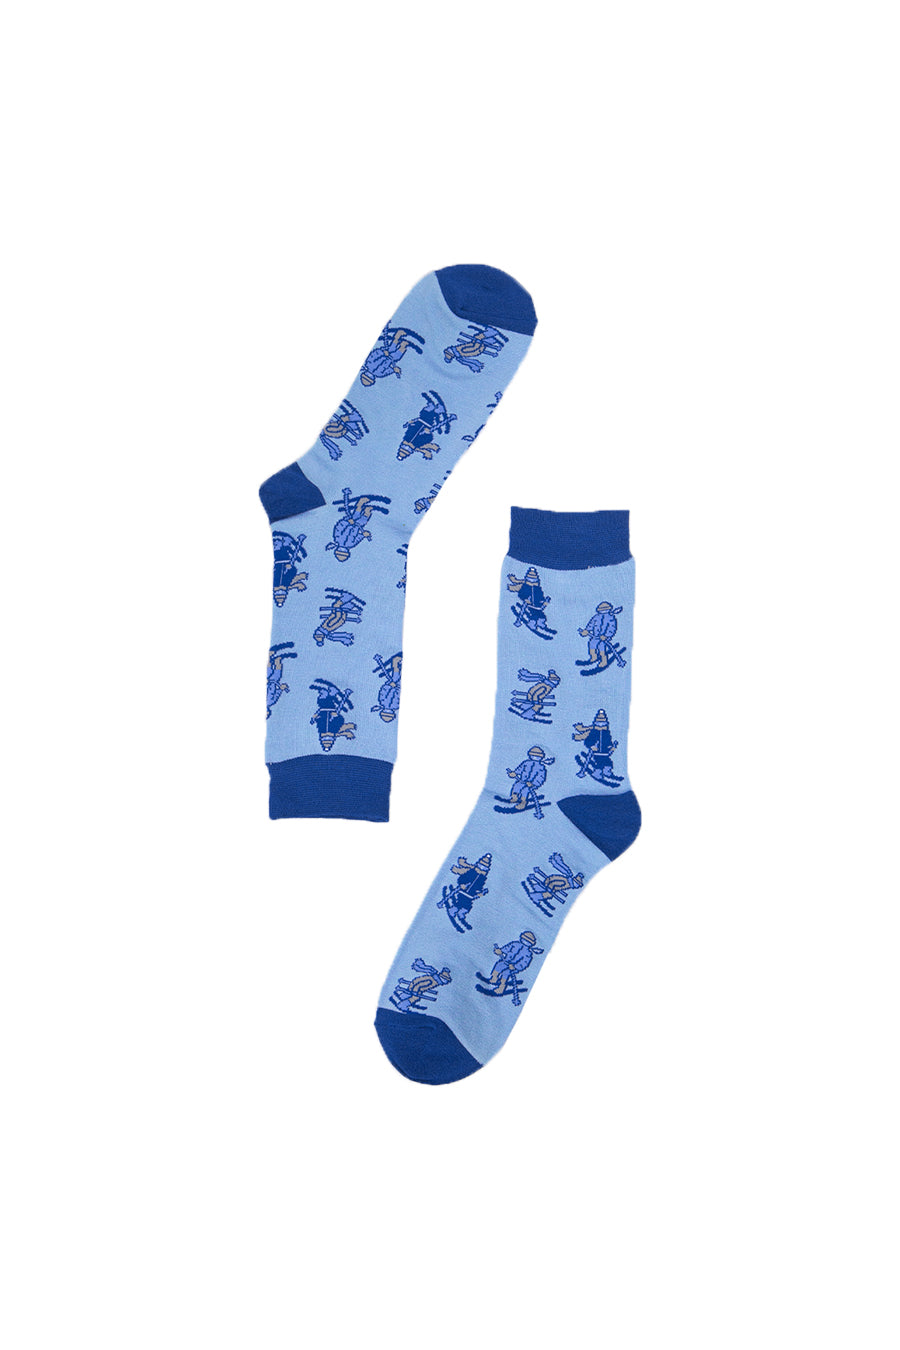 bamboo socks with a pattern of skiers  on them